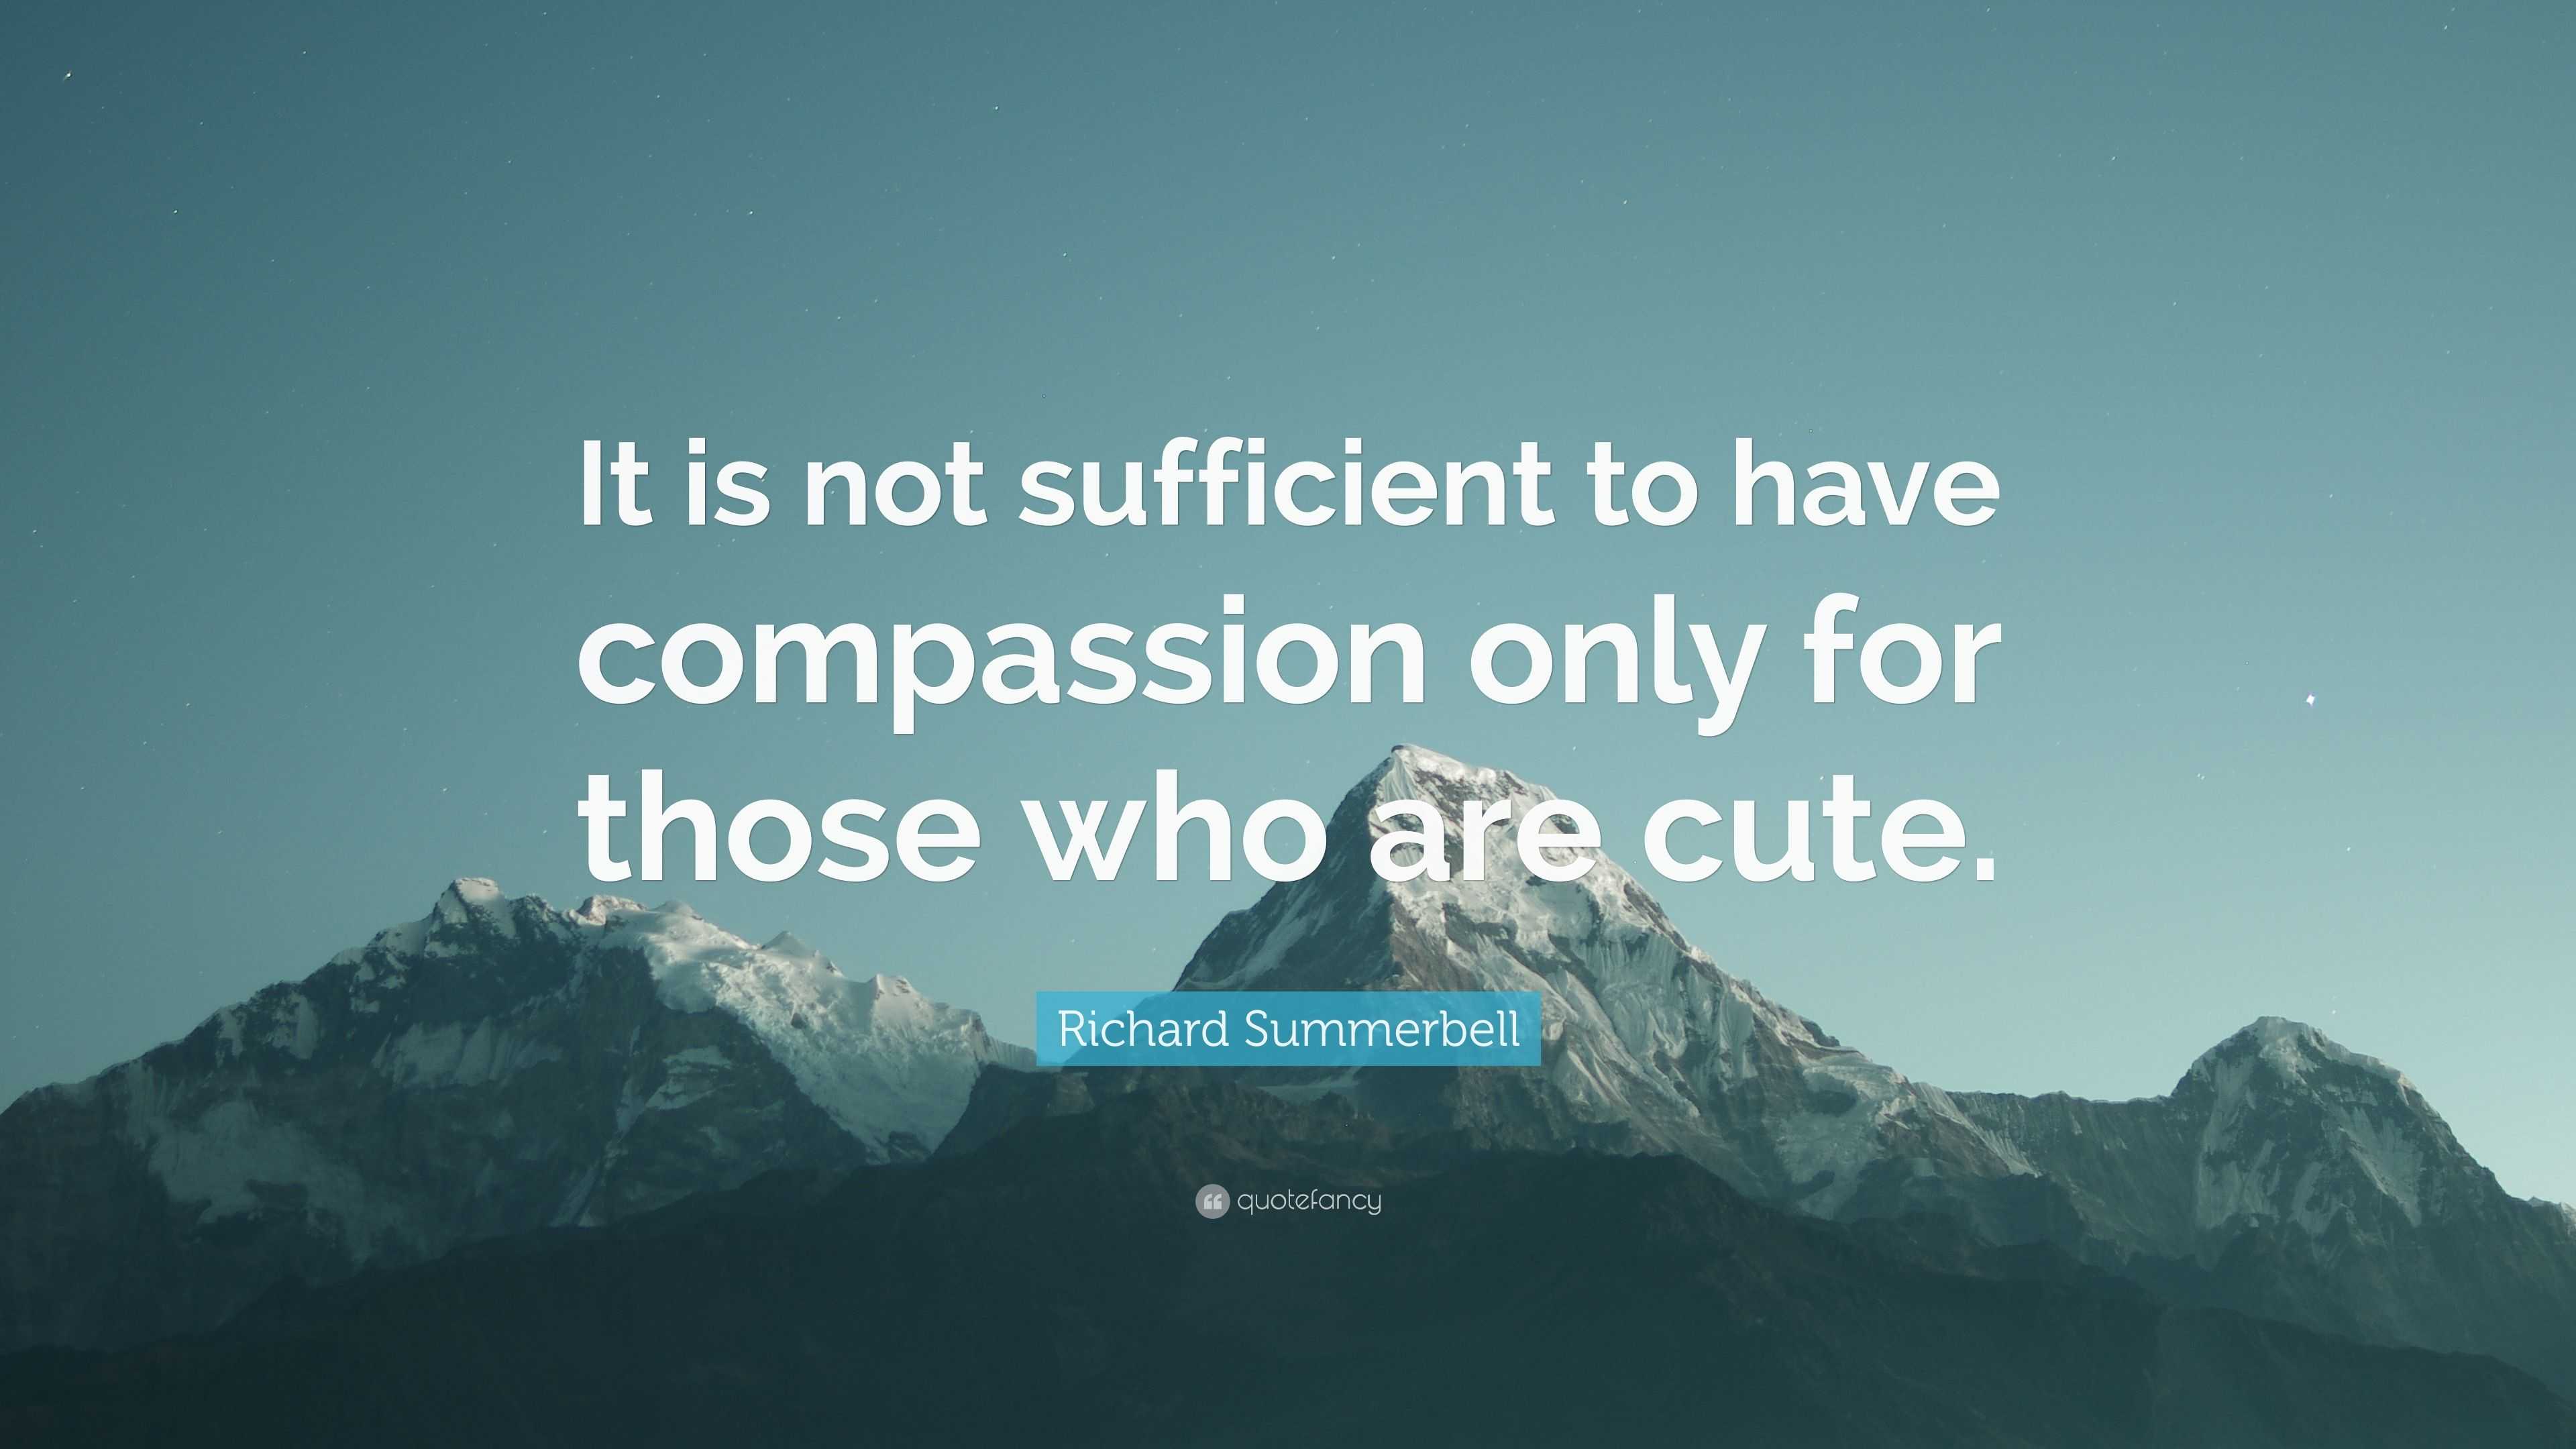 Richard Summerbell Quote: “It is not sufficient to have compassion only ...